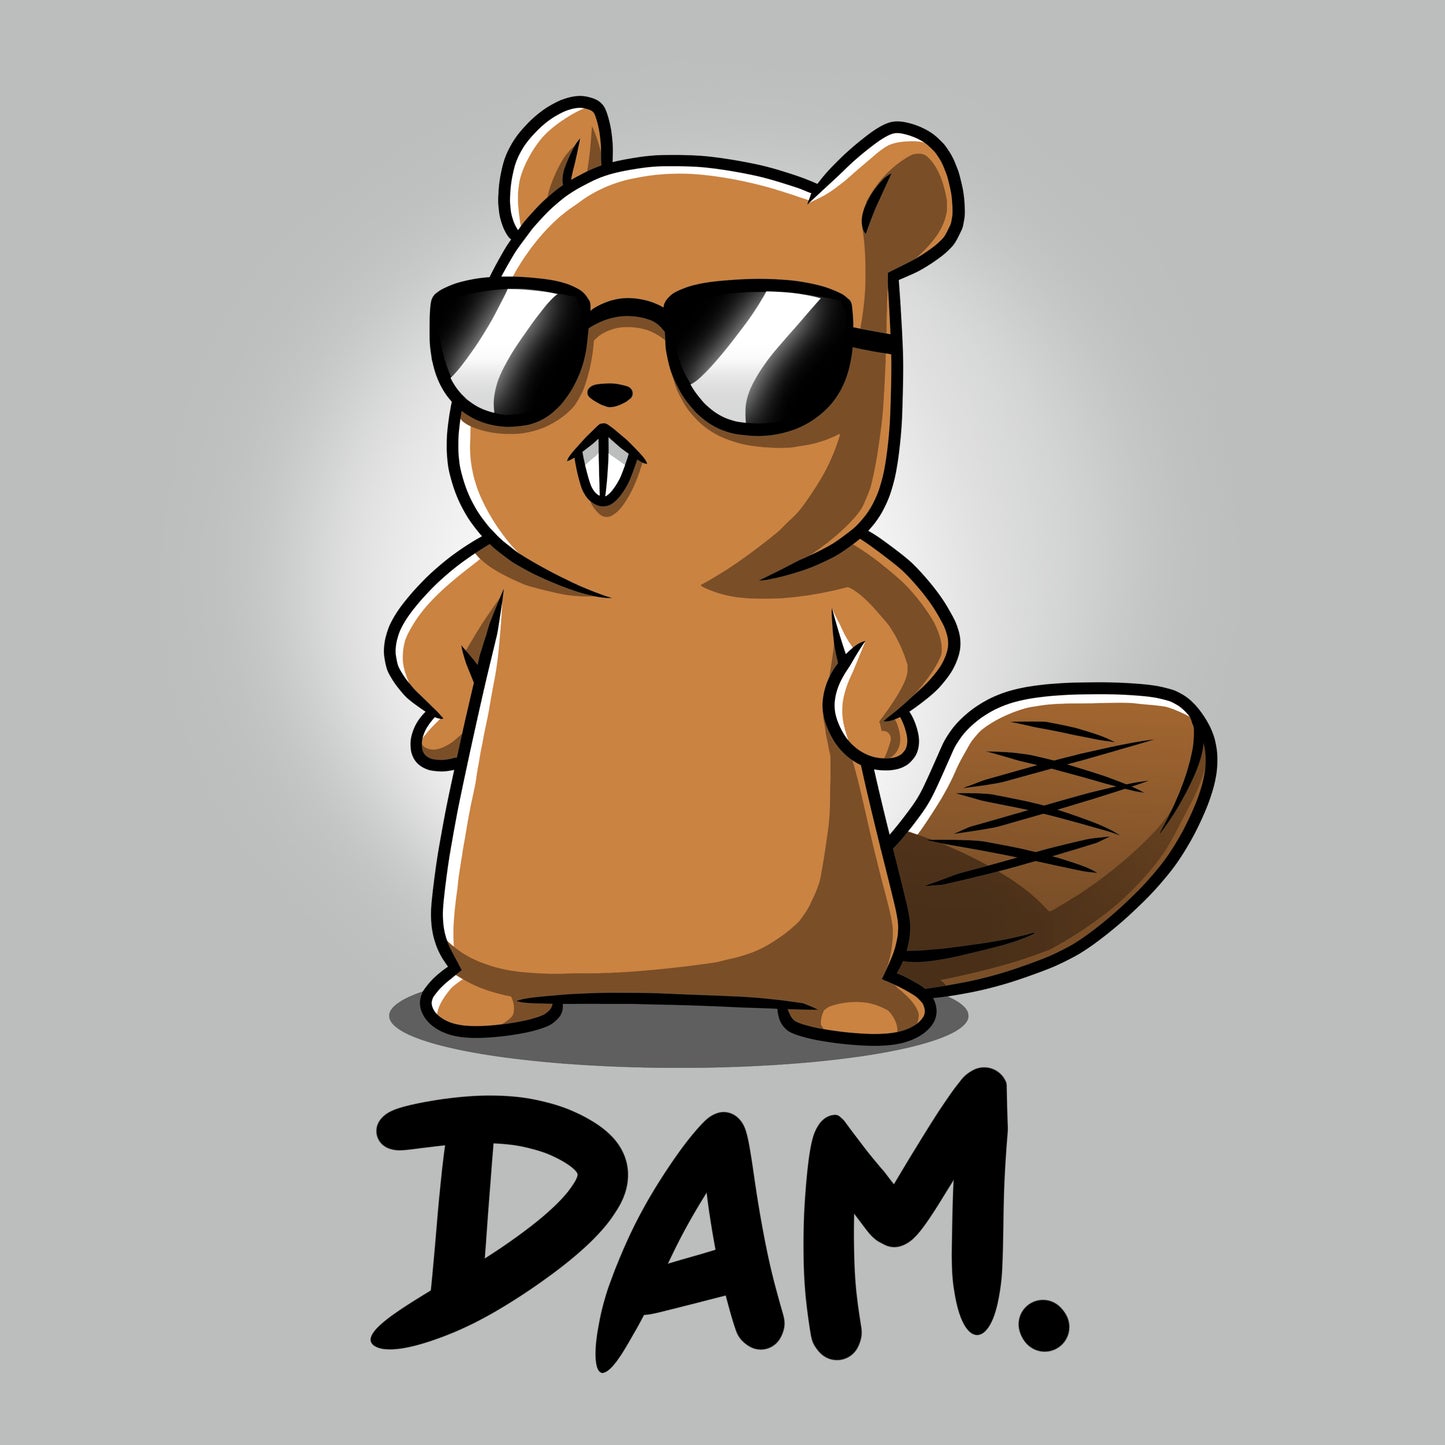 Cartoon of a cool beaver wearing sunglasses, perfect for a Dam T-shirt. This design is made with high-quality Ringspun Cotton by TeeTurtle.